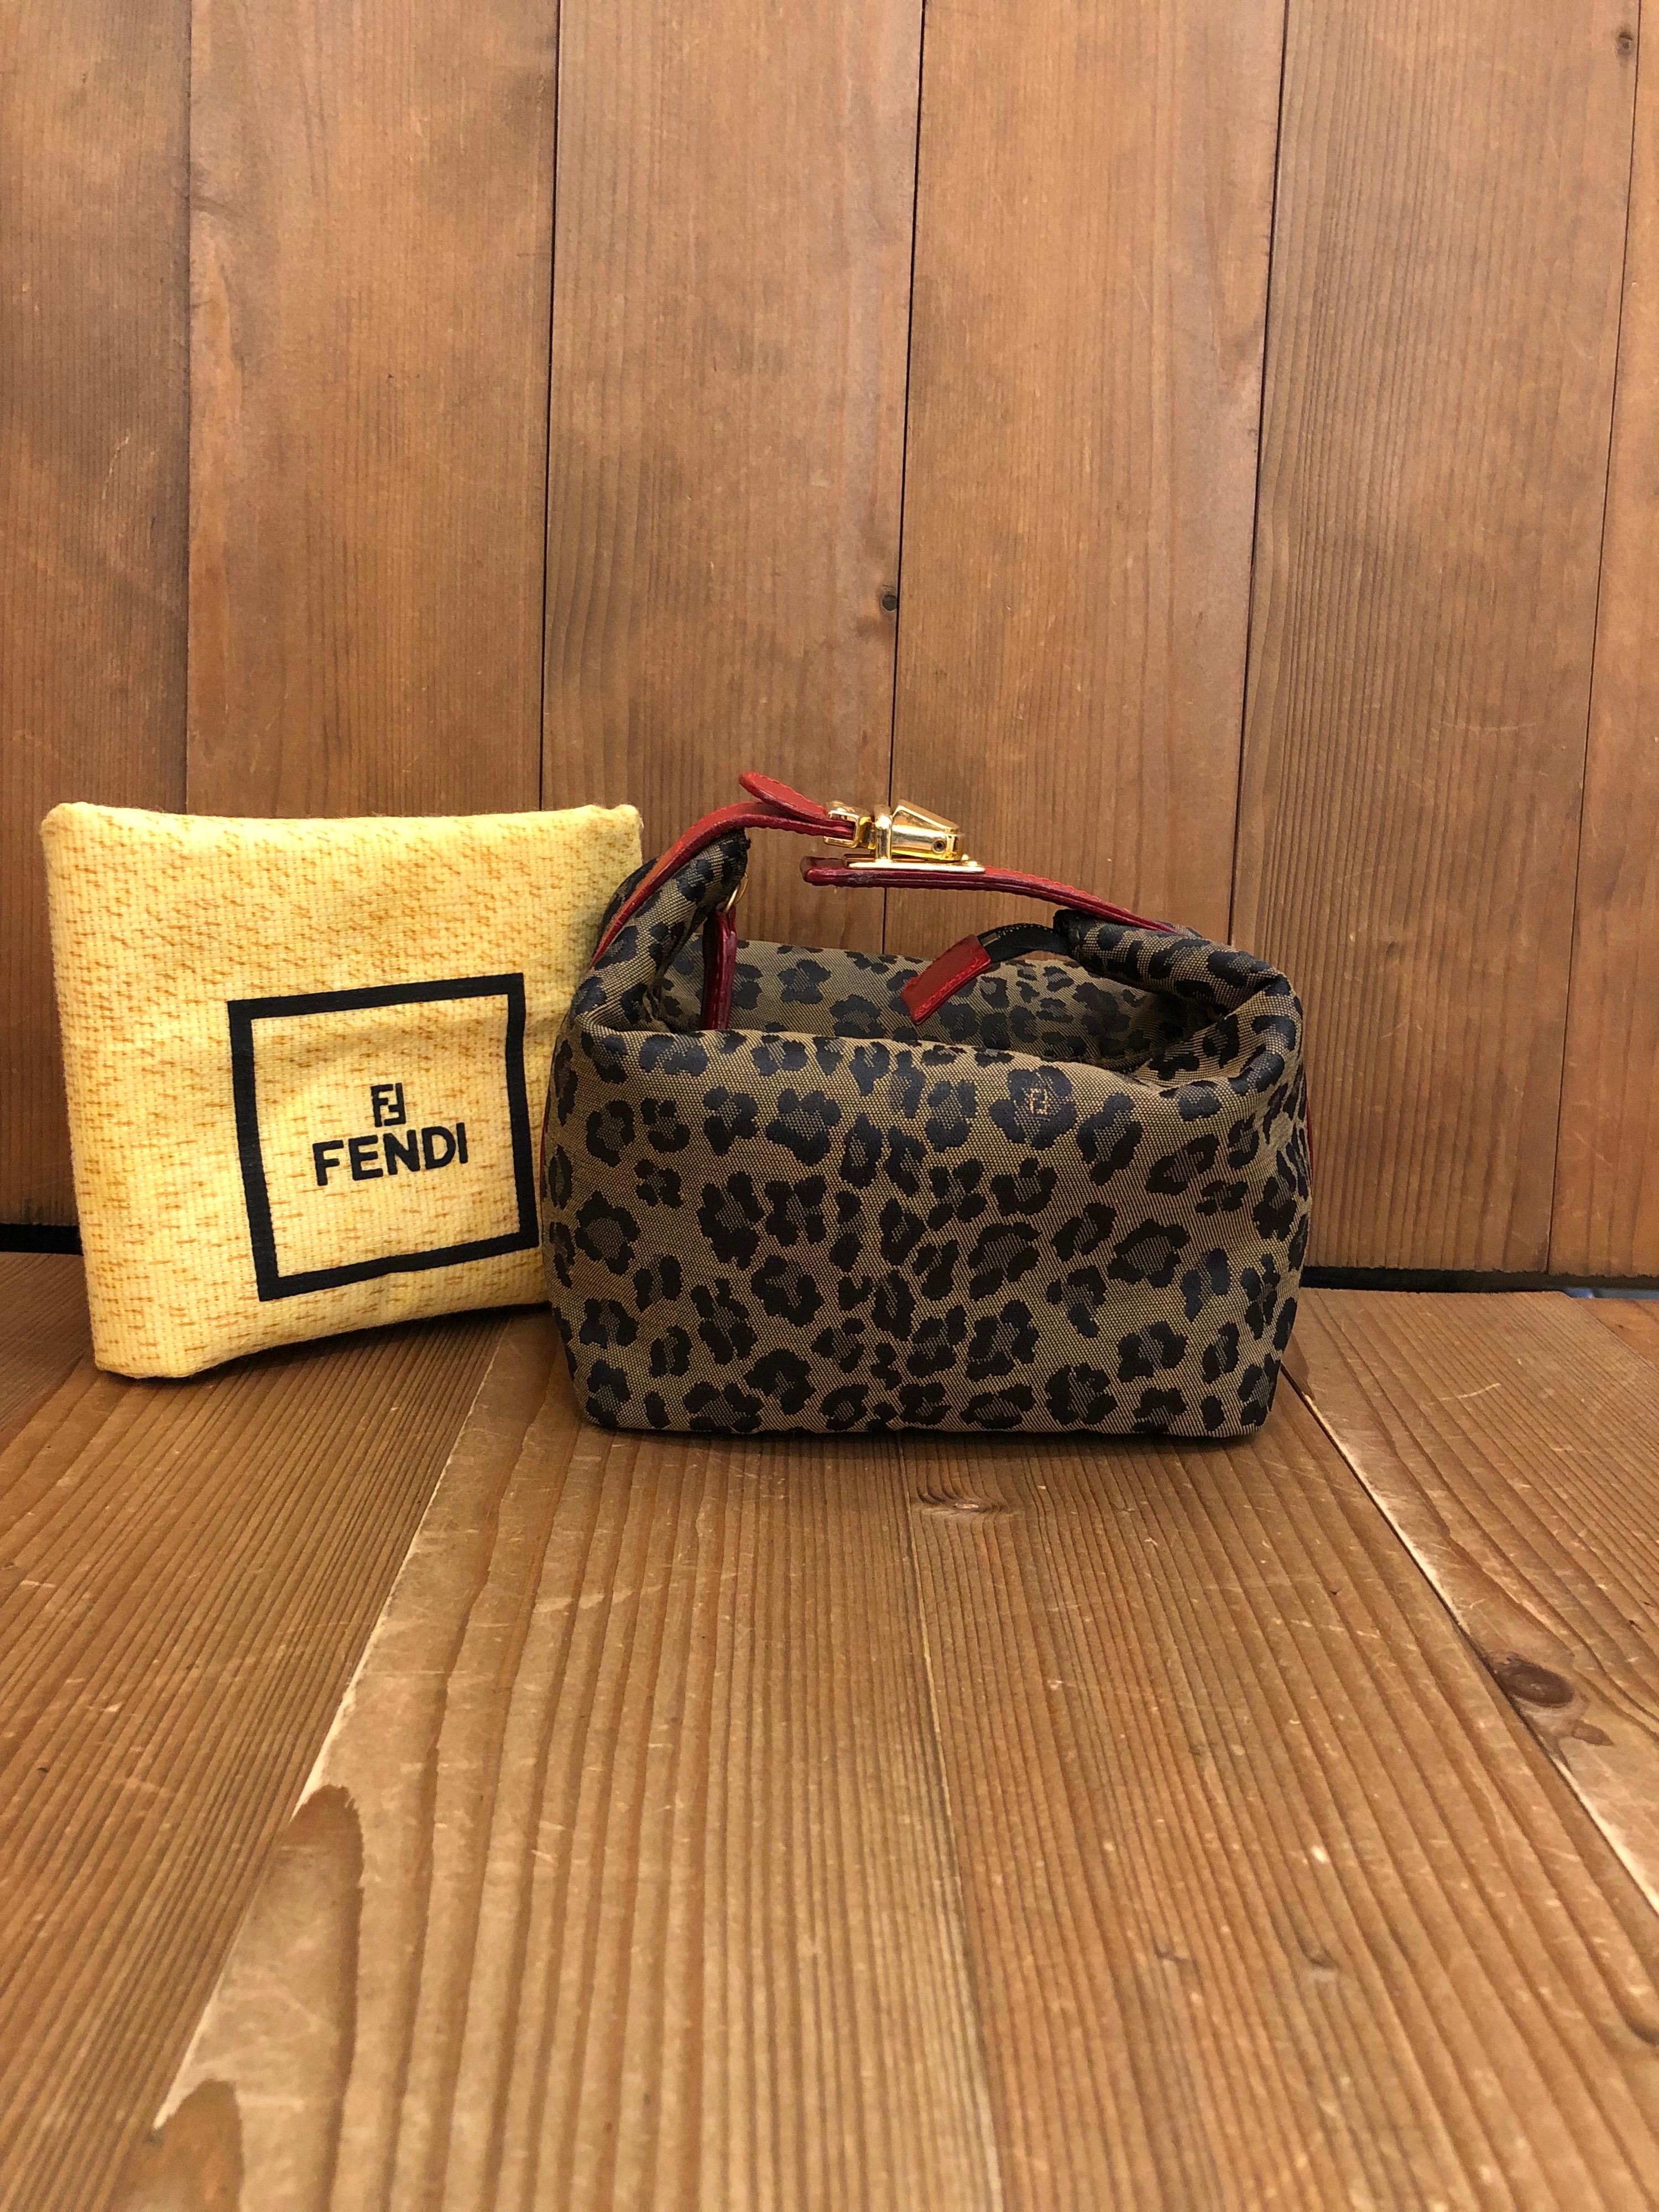 1990s Fendi mini vanity pouch in Fendi's leopard jacquard featuring gold toned buckled handle. Made in Italy. Measures 5.75 x 4 x 3.75 inches (fits plus-sized iPhone). Comes with dustbag.

Condition: Minor signs of wear. Generally in good